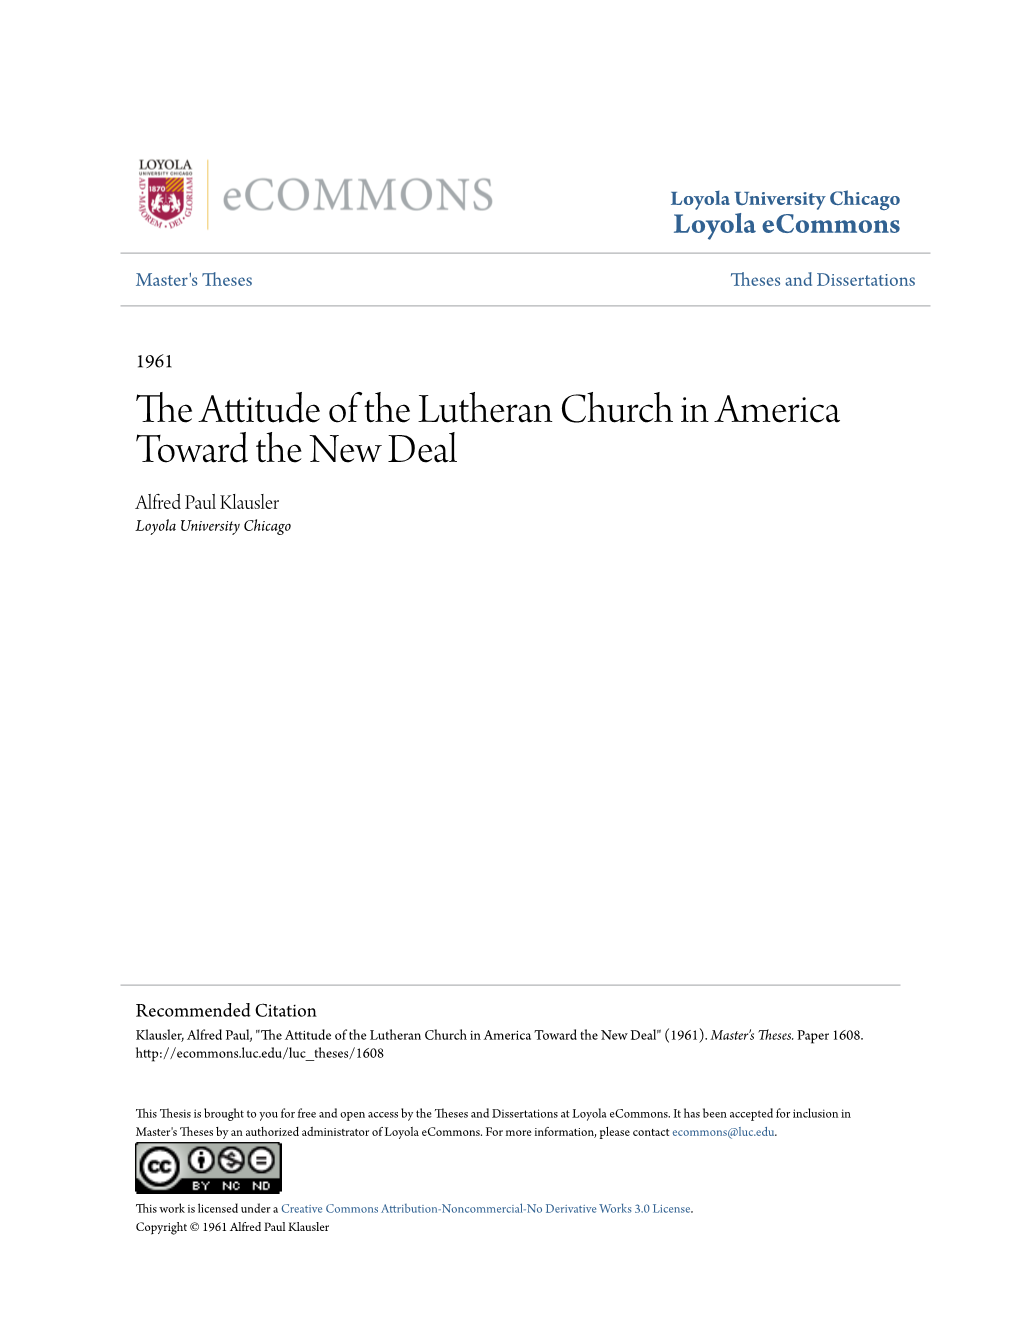 The Attitude of the Lutheran Church in America Toward the New Deal Alfred Paul Klausler Loyola University Chicago